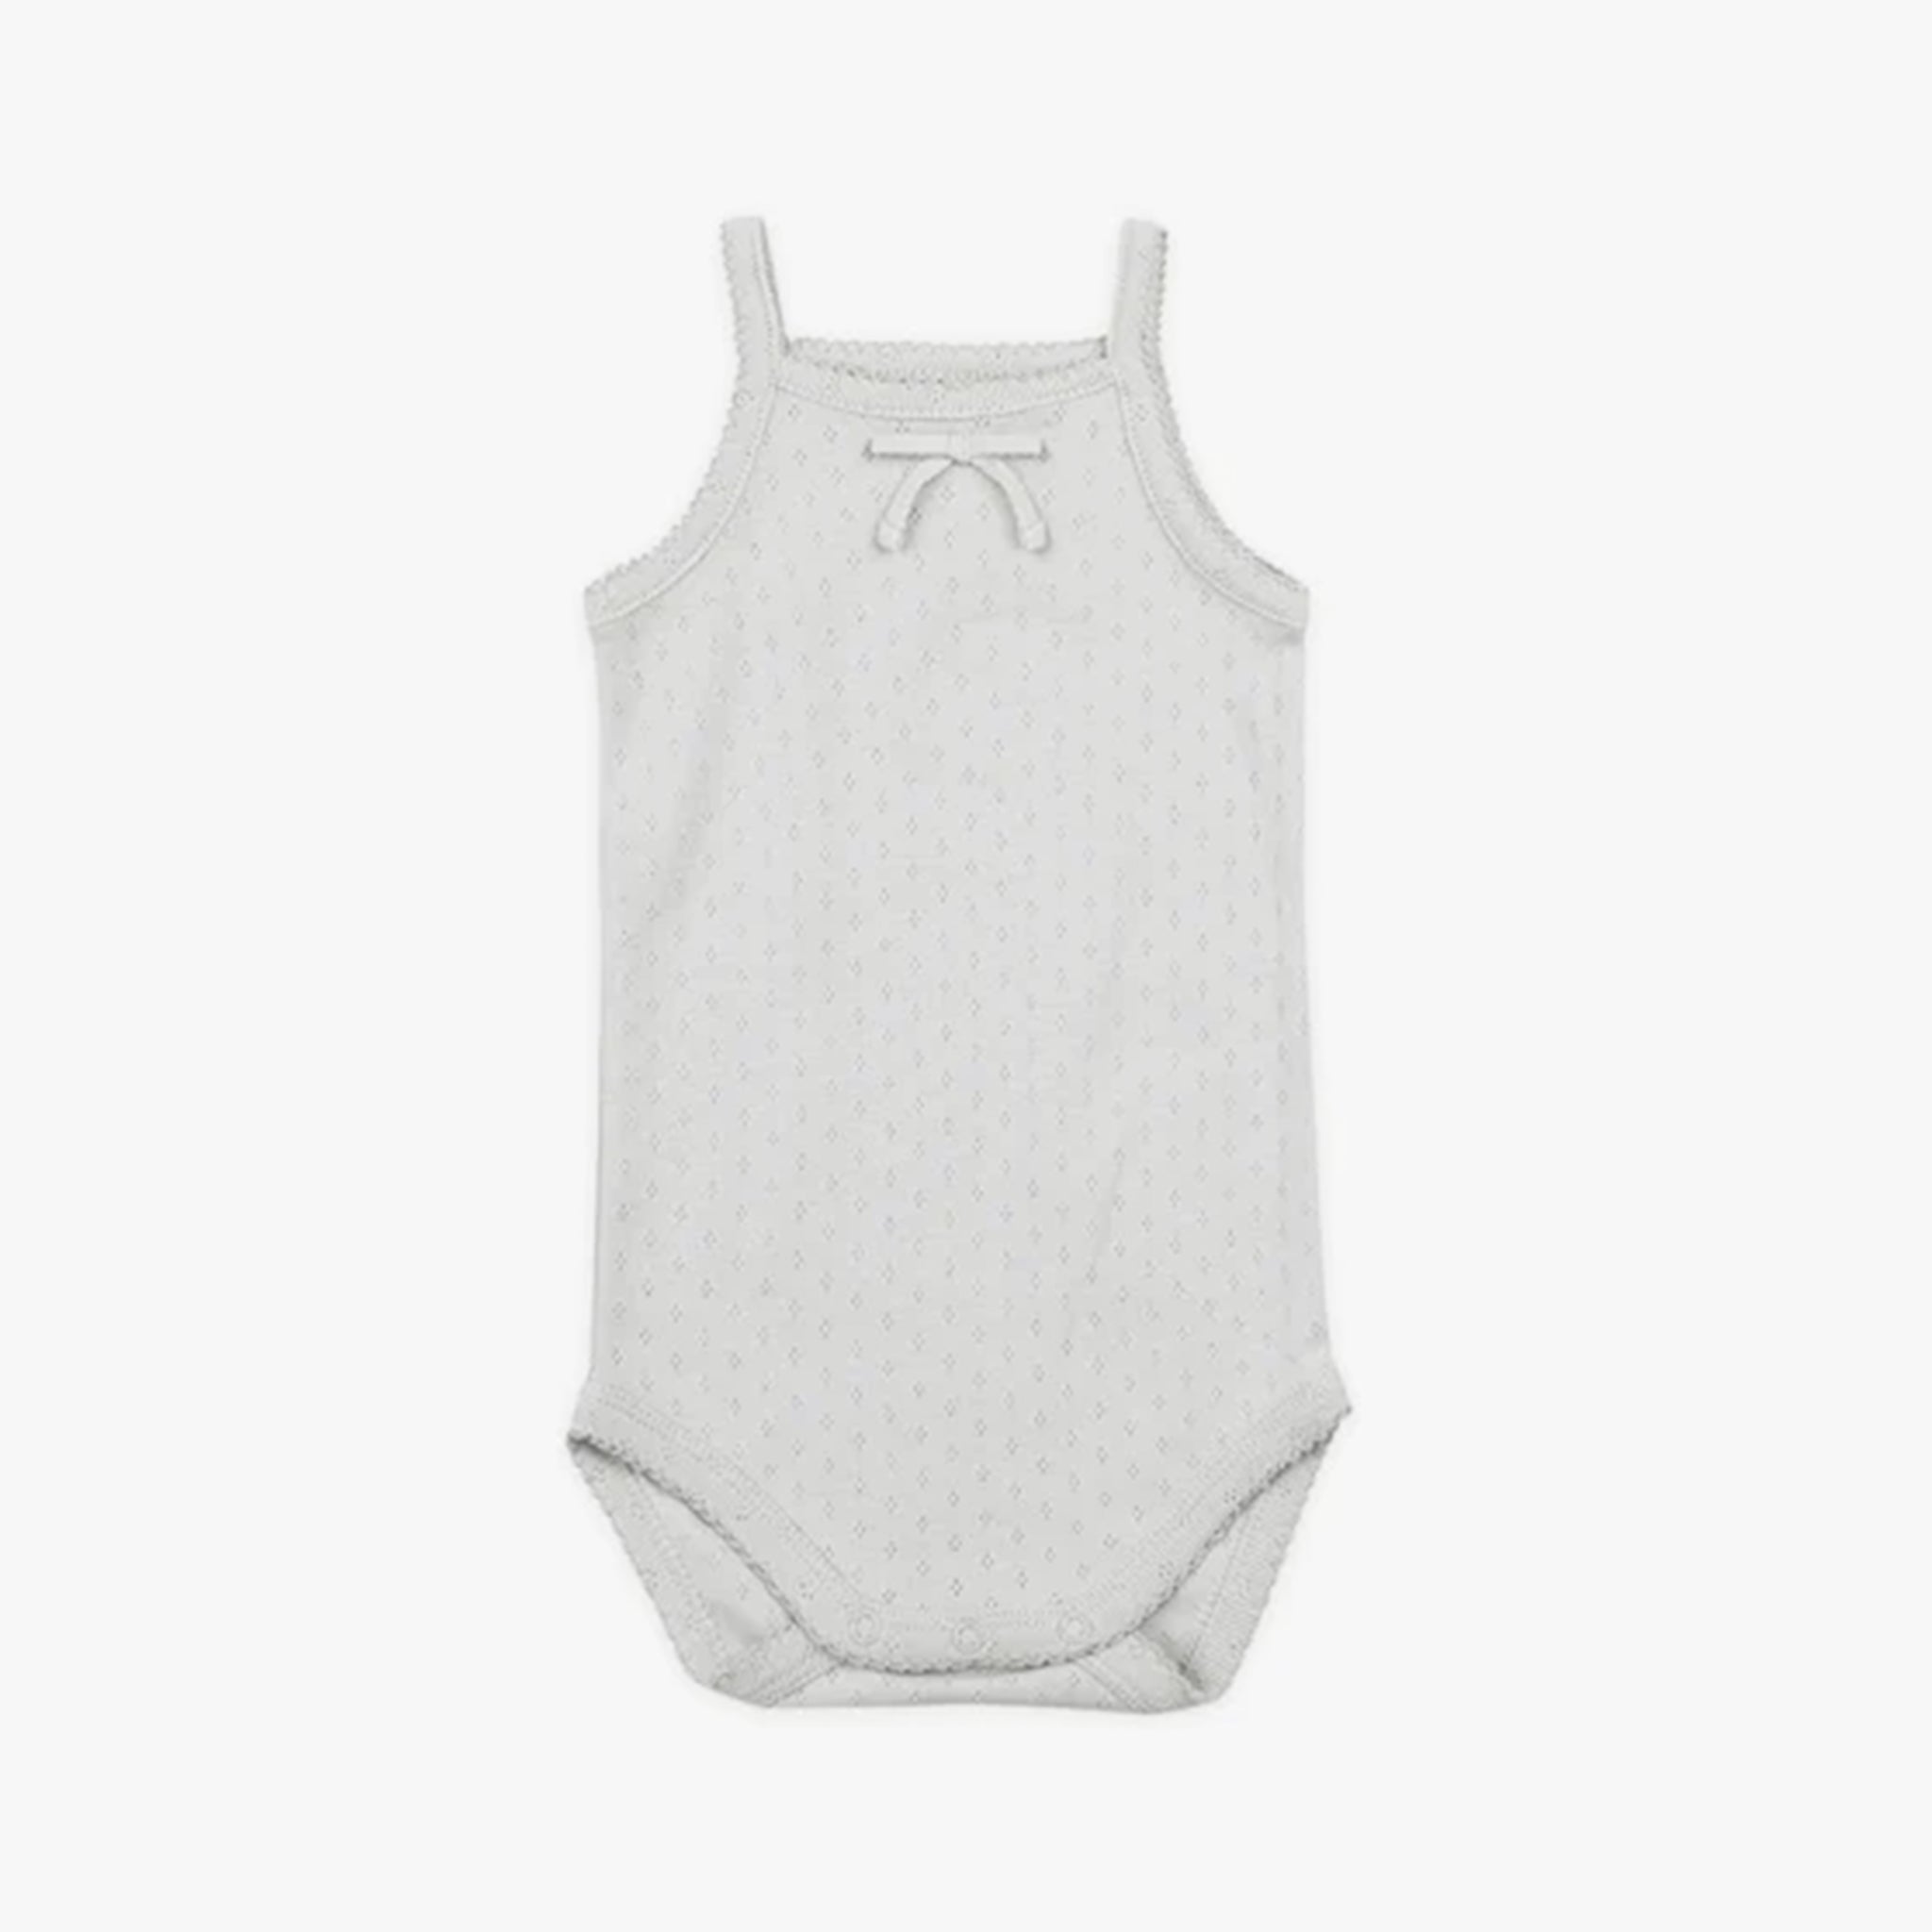 On a white background is a light blue tank onesie with snap closure and a small bow detail at the top. 